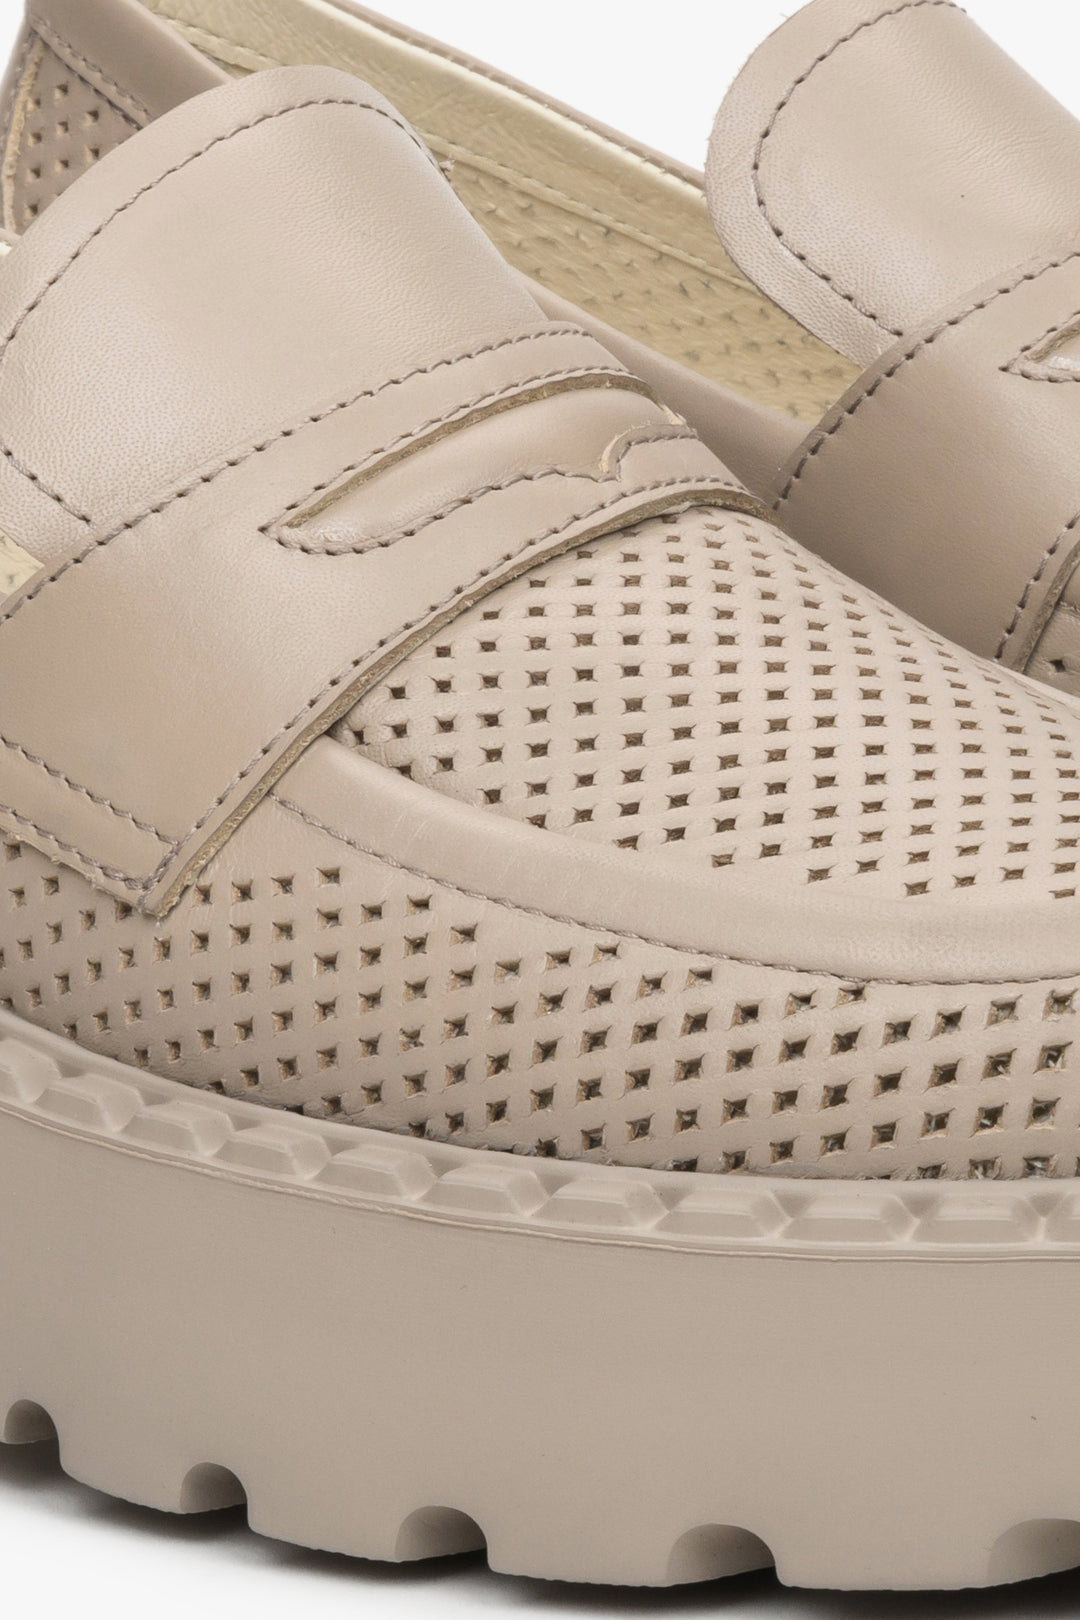 Women's leather loafers for summer in beige color, brand Estro - close-up on the stitching system and perforation.